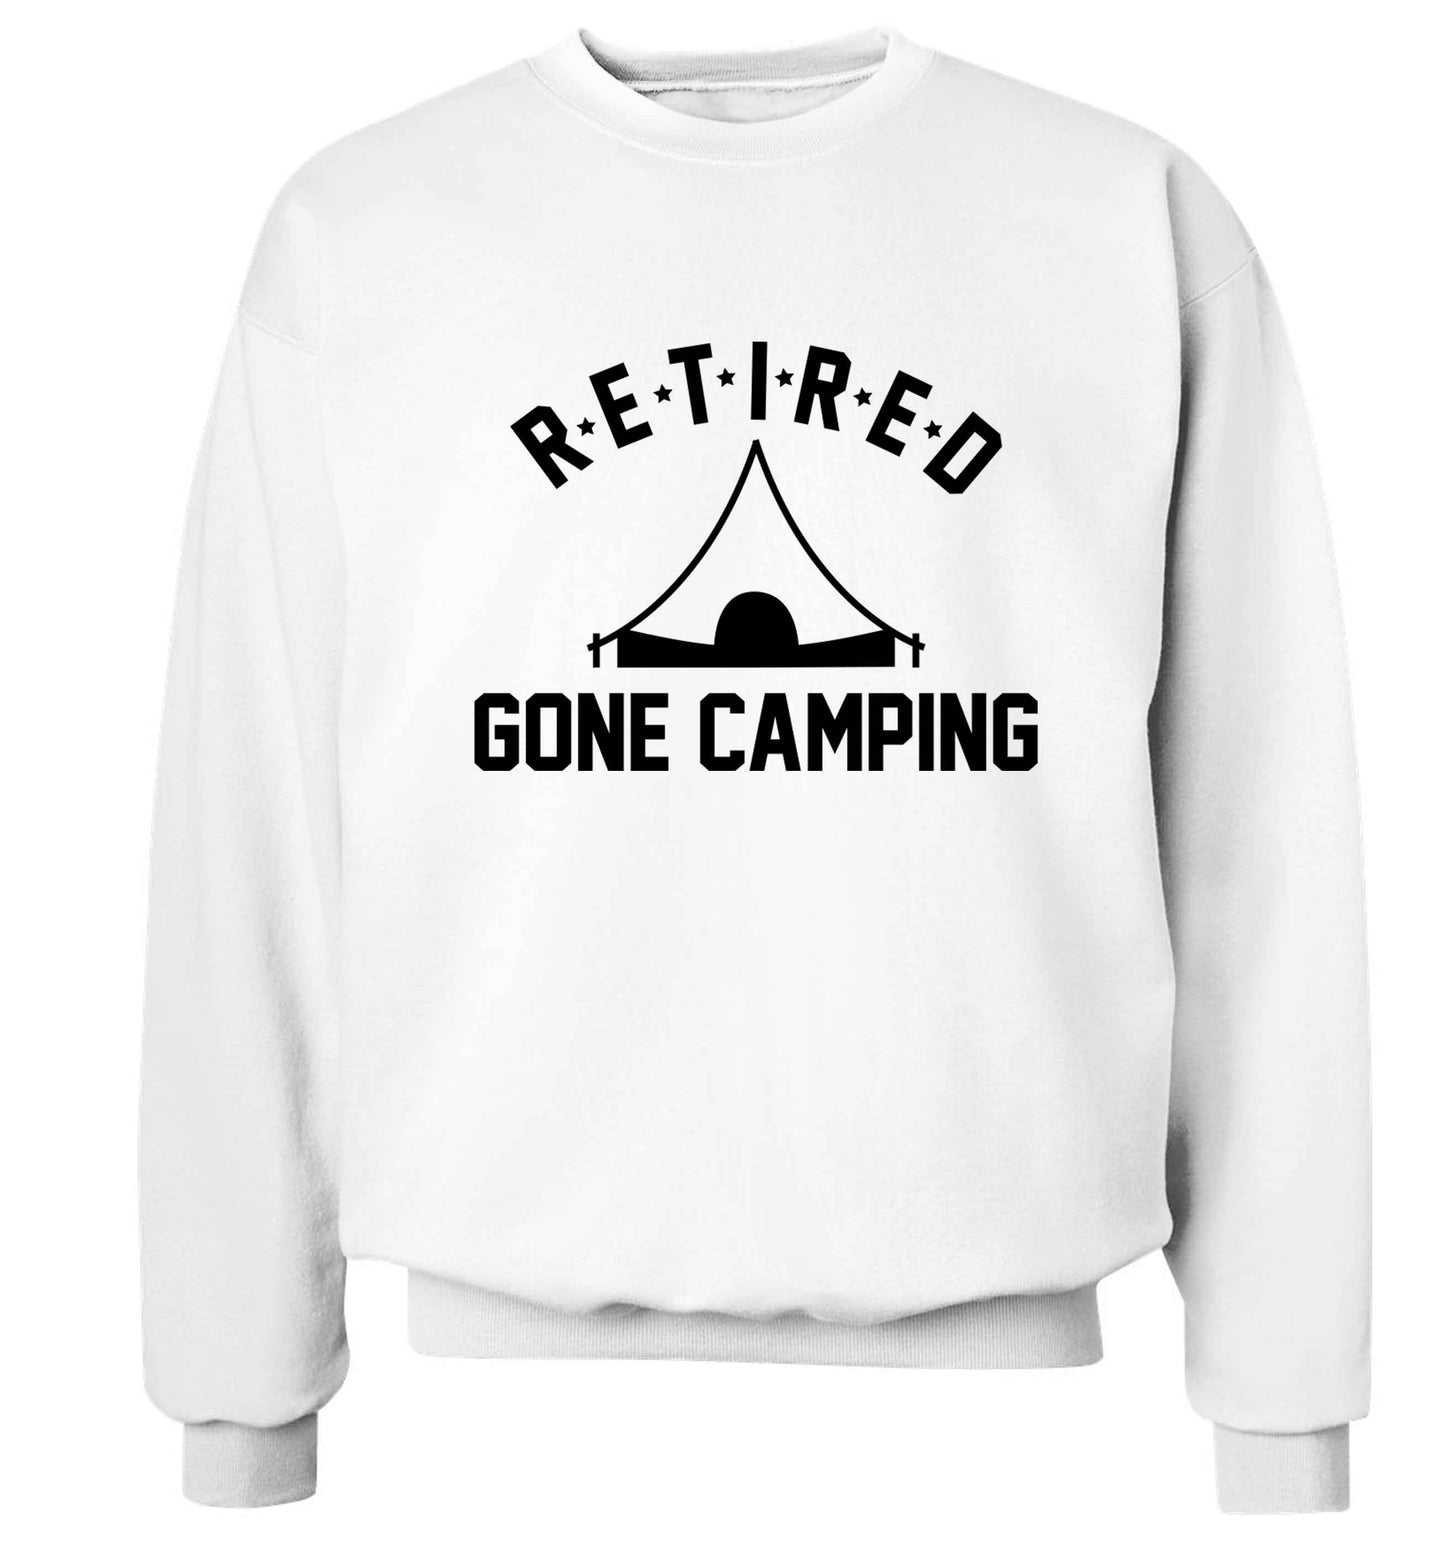 Retired gone camping Adult's unisex white Sweater 2XL